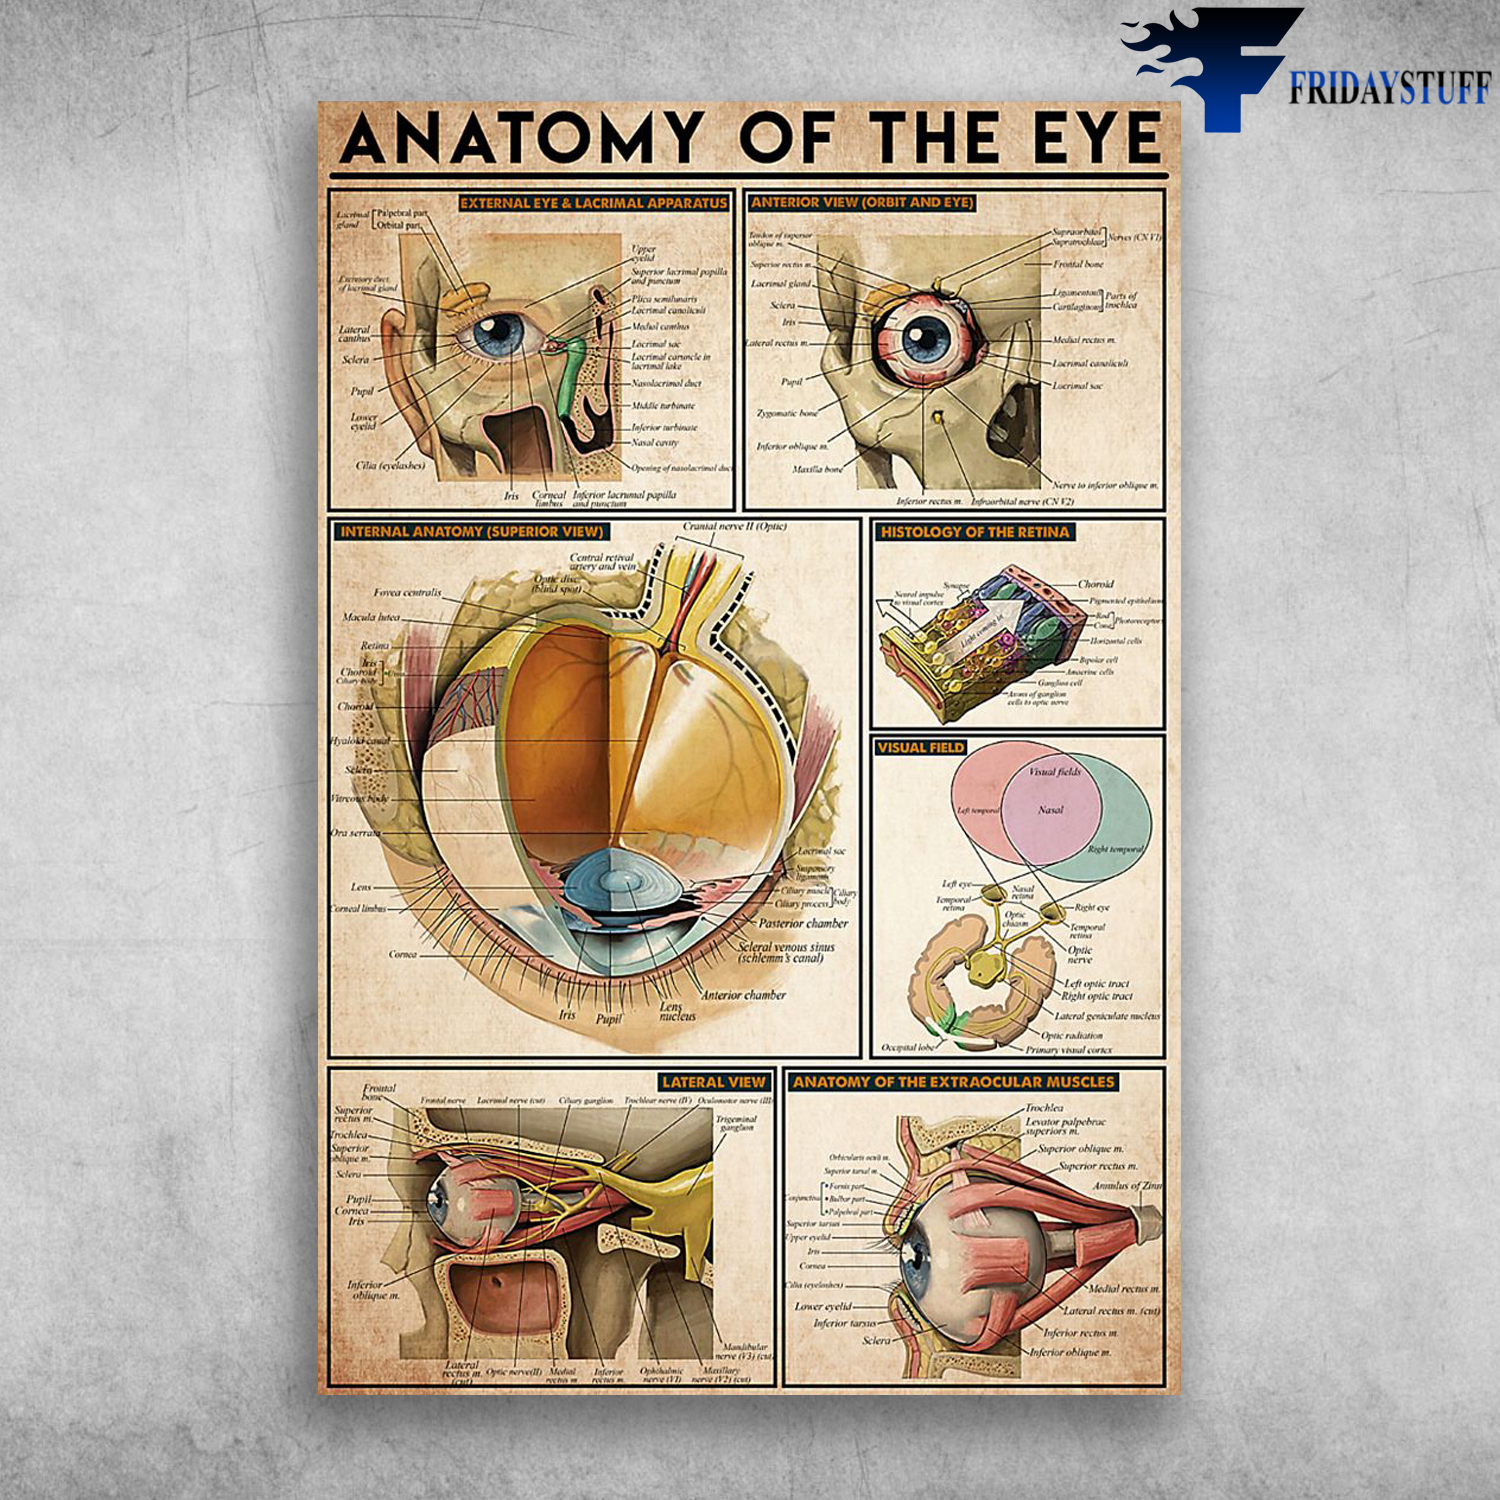 Anatomy Of The Eye Anterior View External Eye And Lacrimal Apparatus